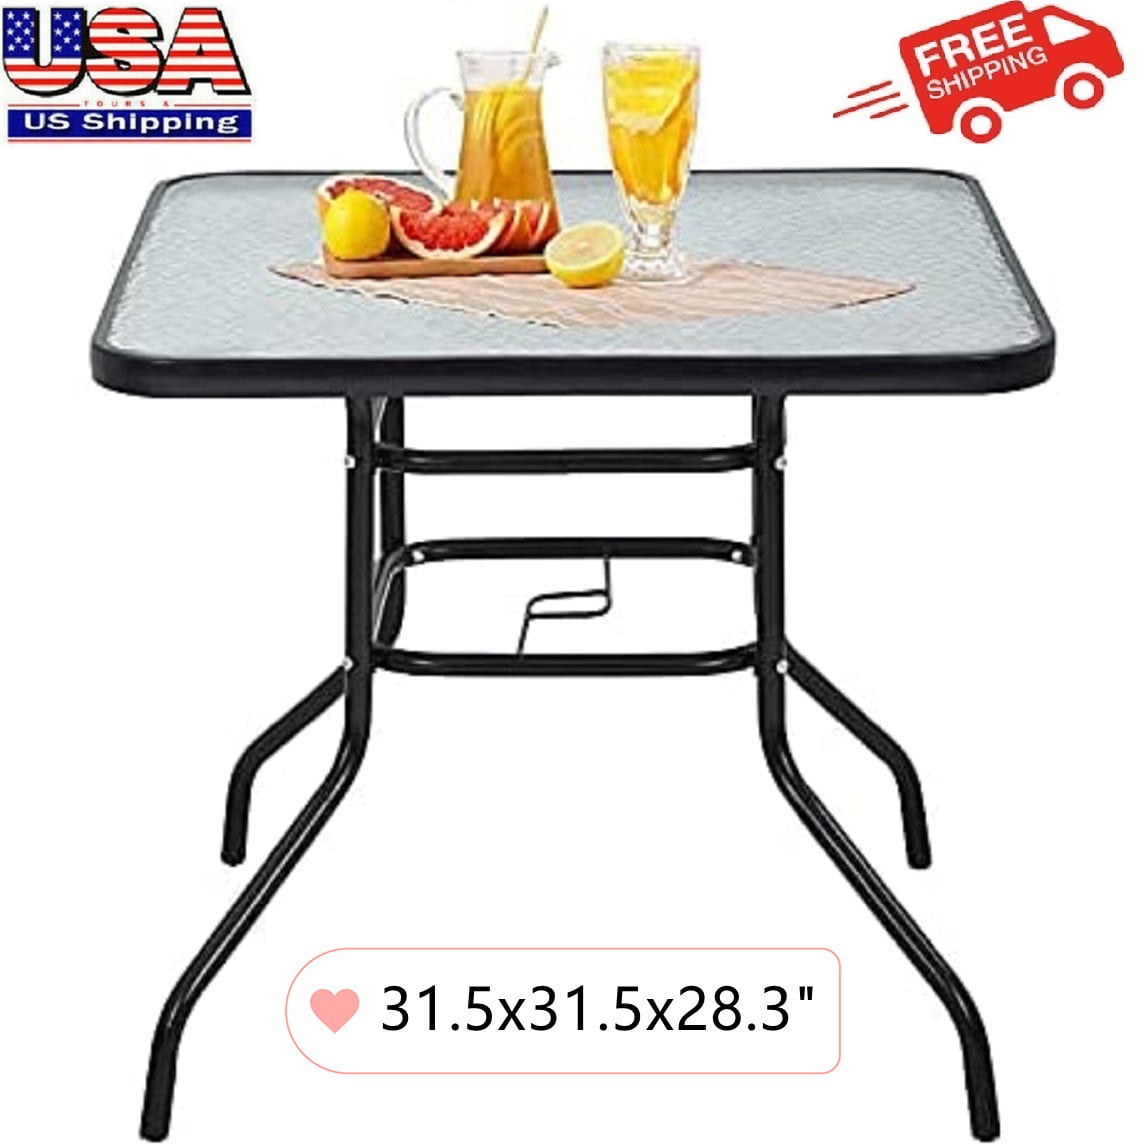 Patio Bistro Tempered Glass Table Top with Umbrella Hole Outdoor Dining Table Square Outside Banquet Furniture for Garden Pool Side Deck Lawn 